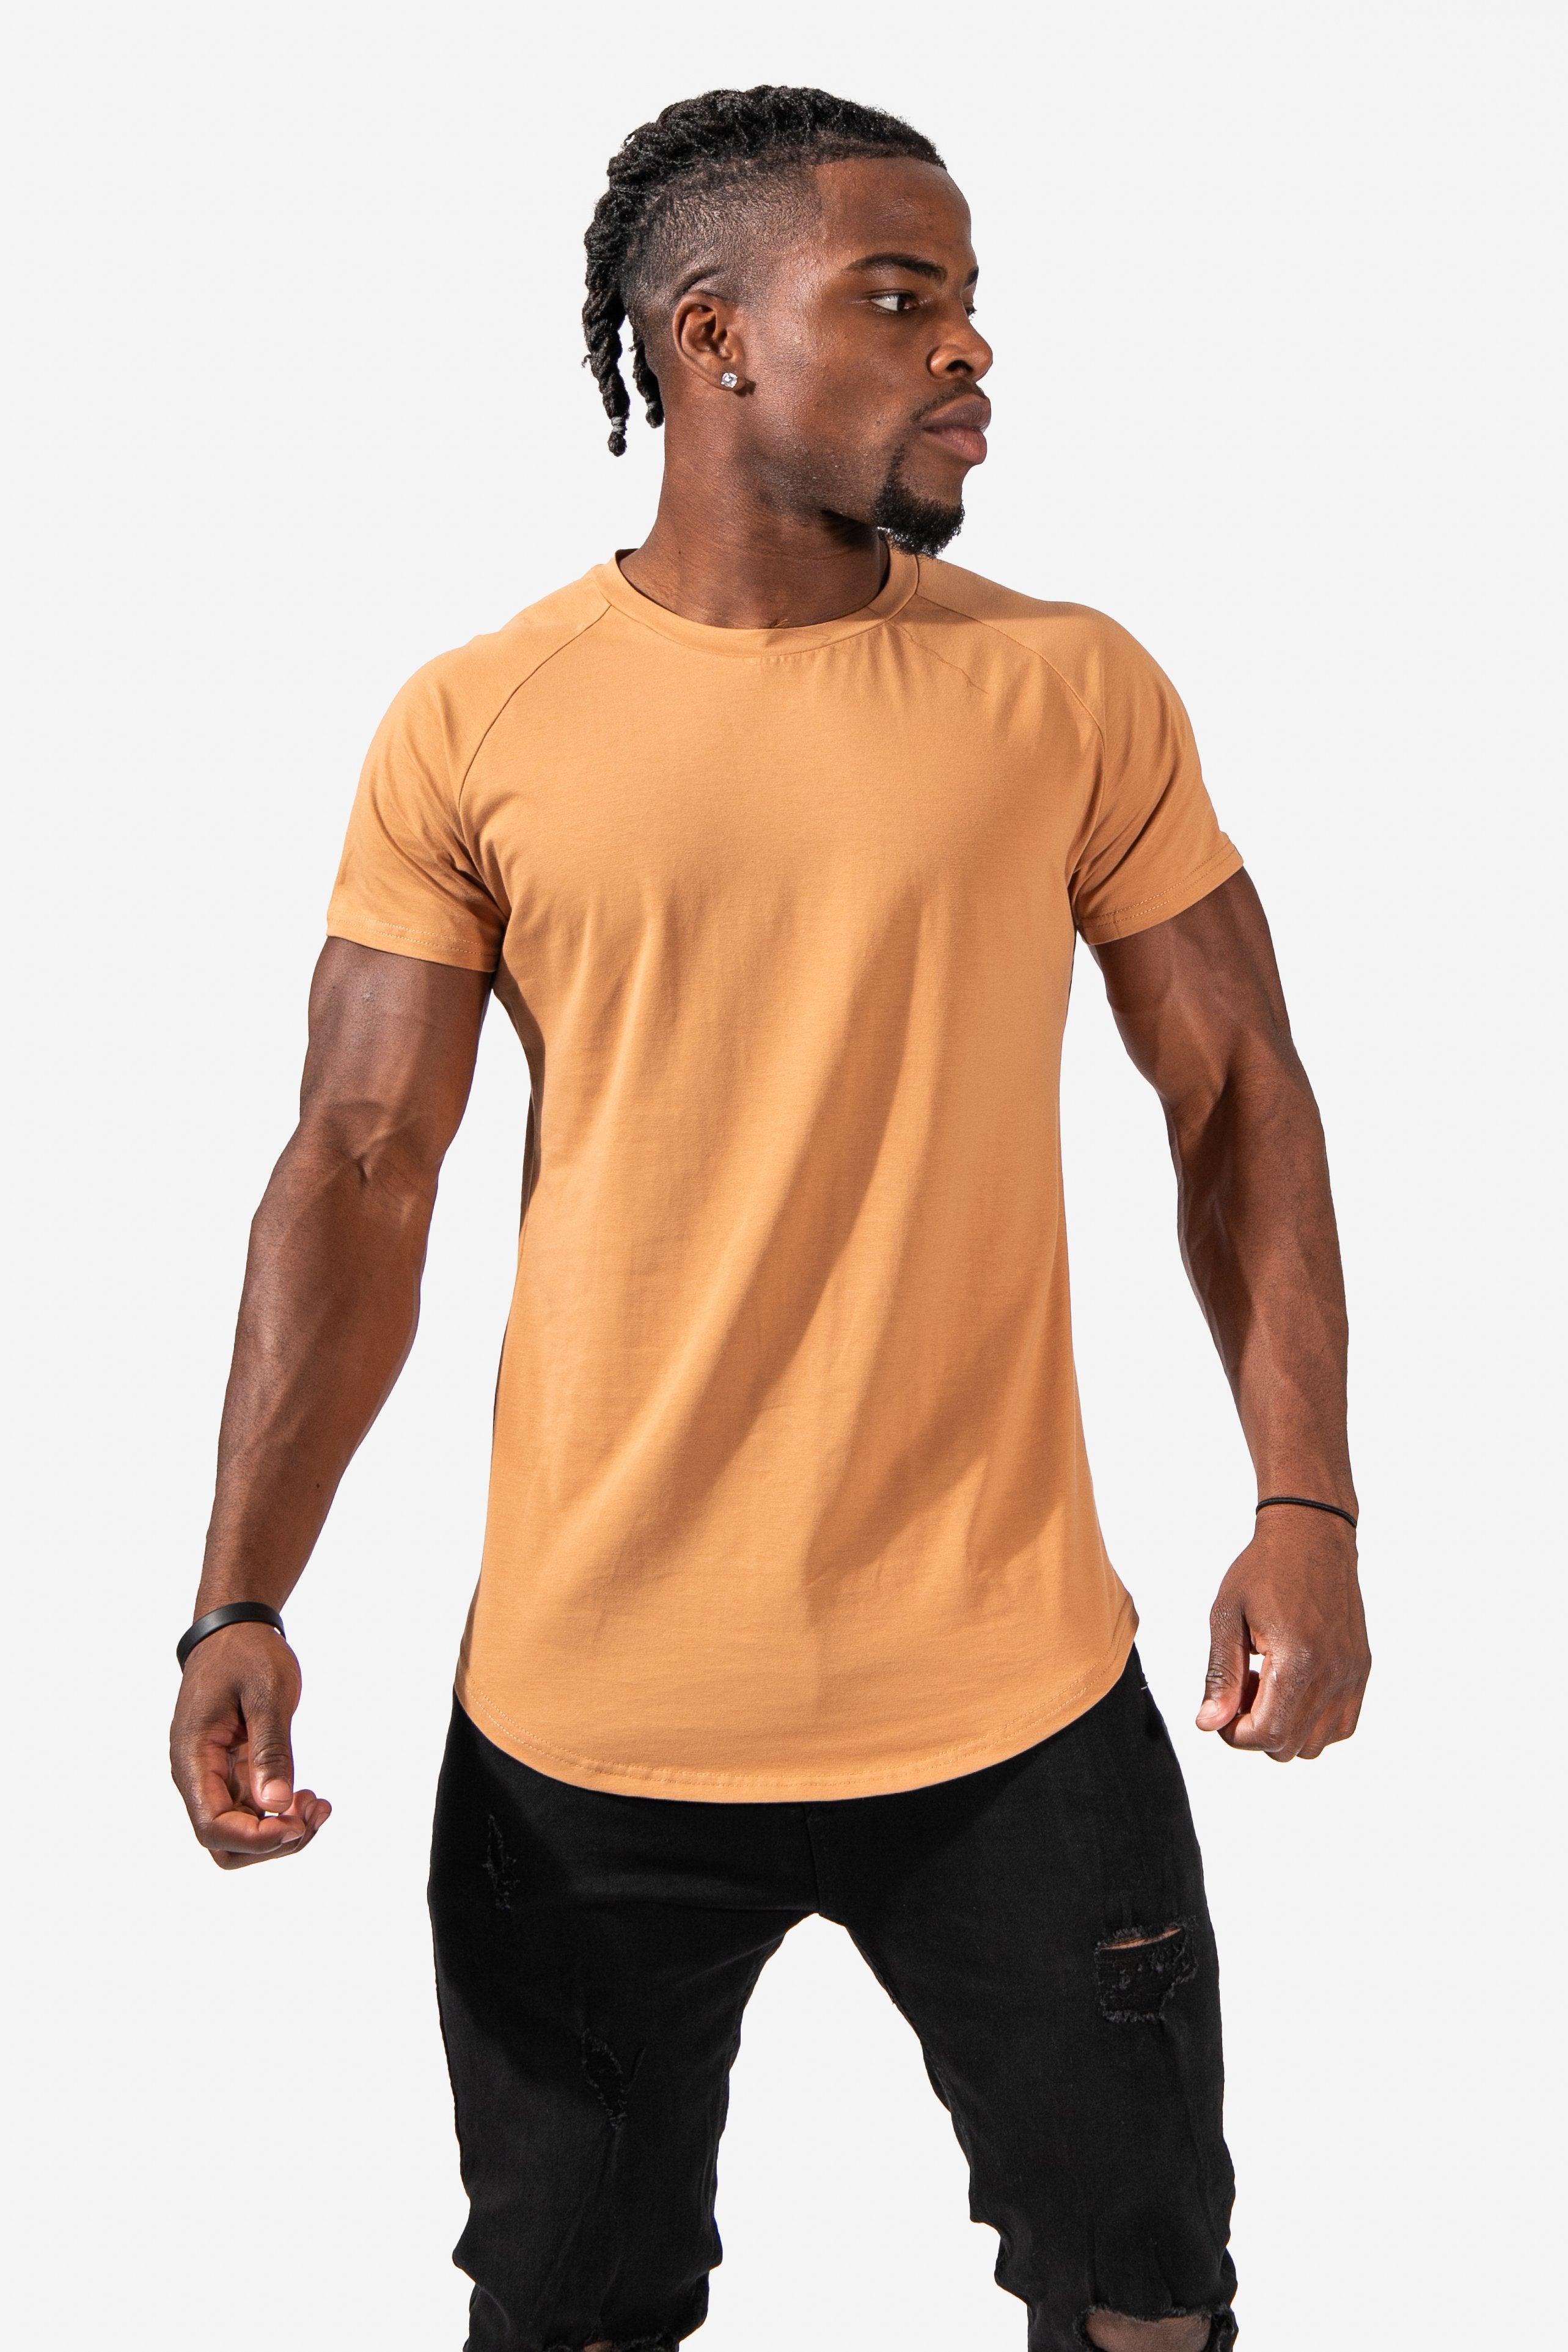 Scoop Neck Fitted Gym T-Shirt - Khaki T-Shirts Jed North 